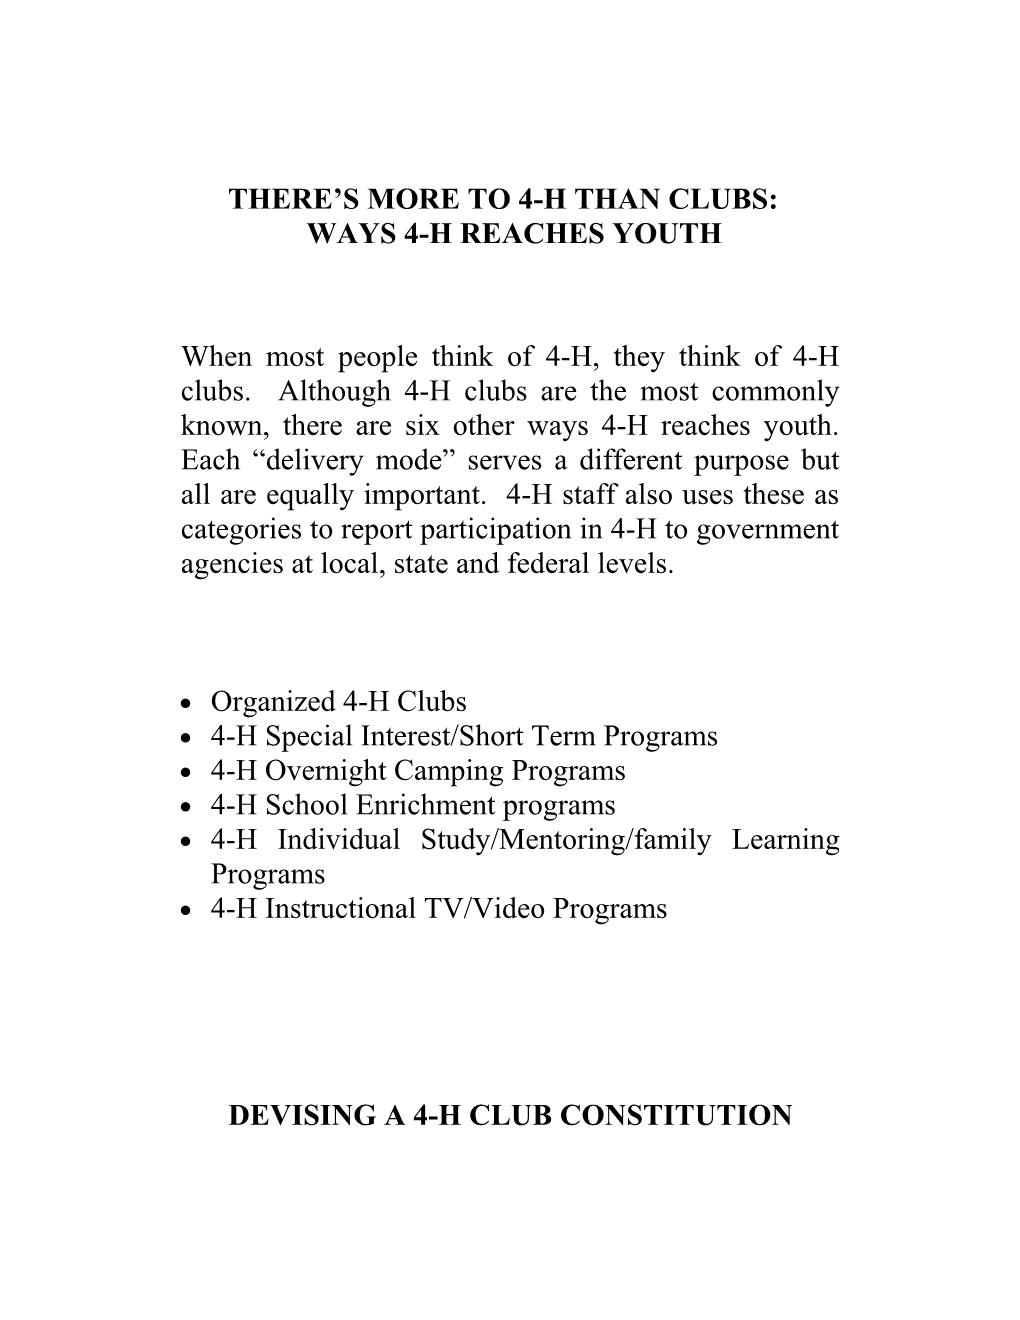 There S More to 4-H Than Clubs